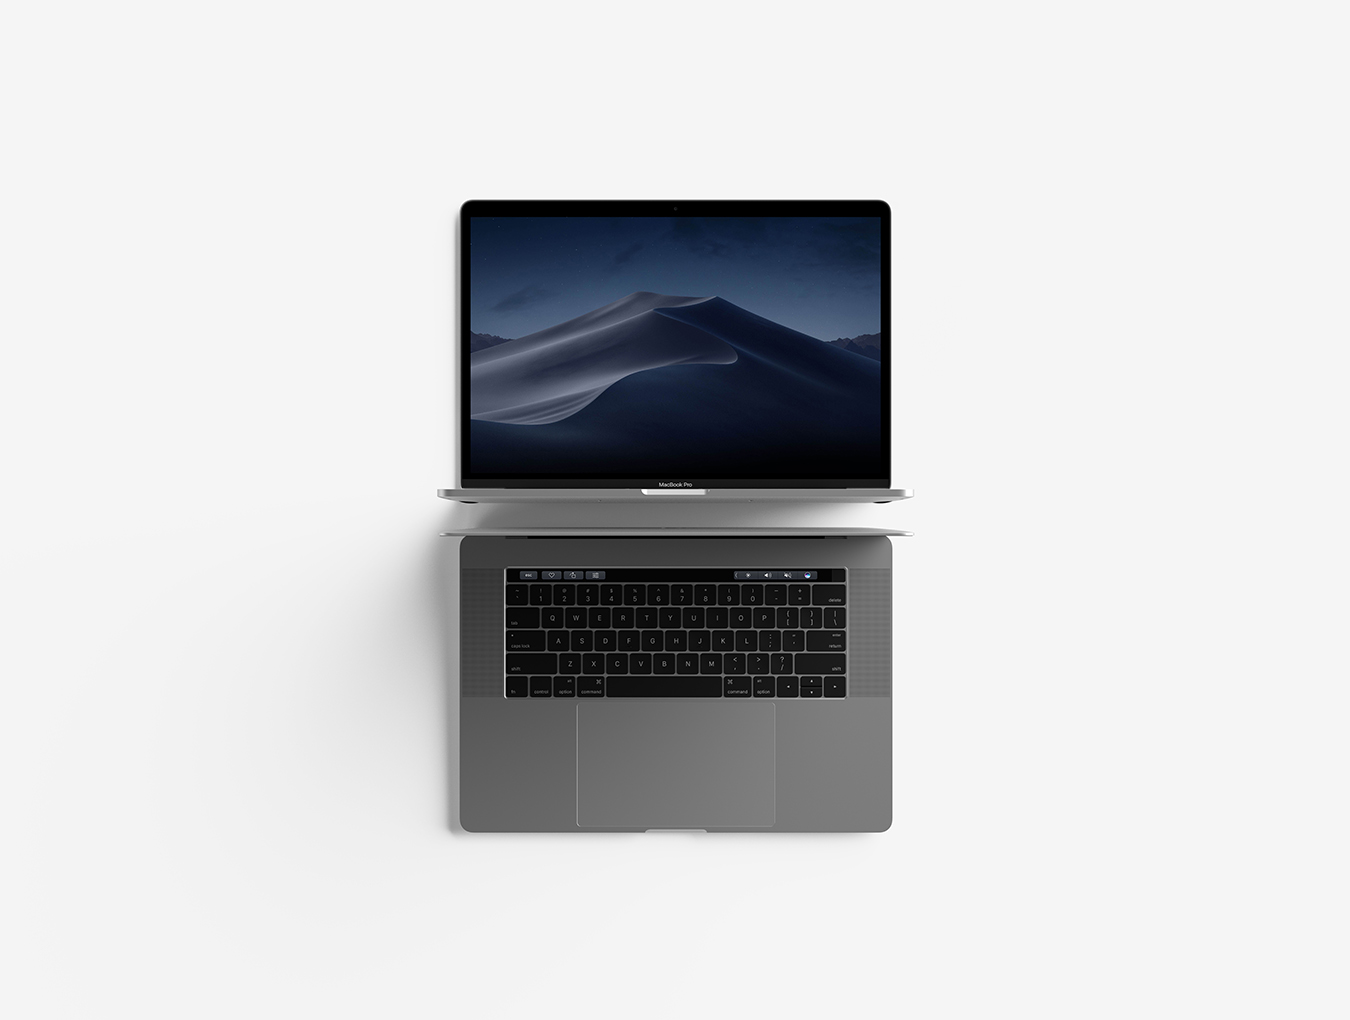 modern_top_view_macbook_pro_mockup_by_anthony_boyd_graphics_(7)_1533138669240.jpg